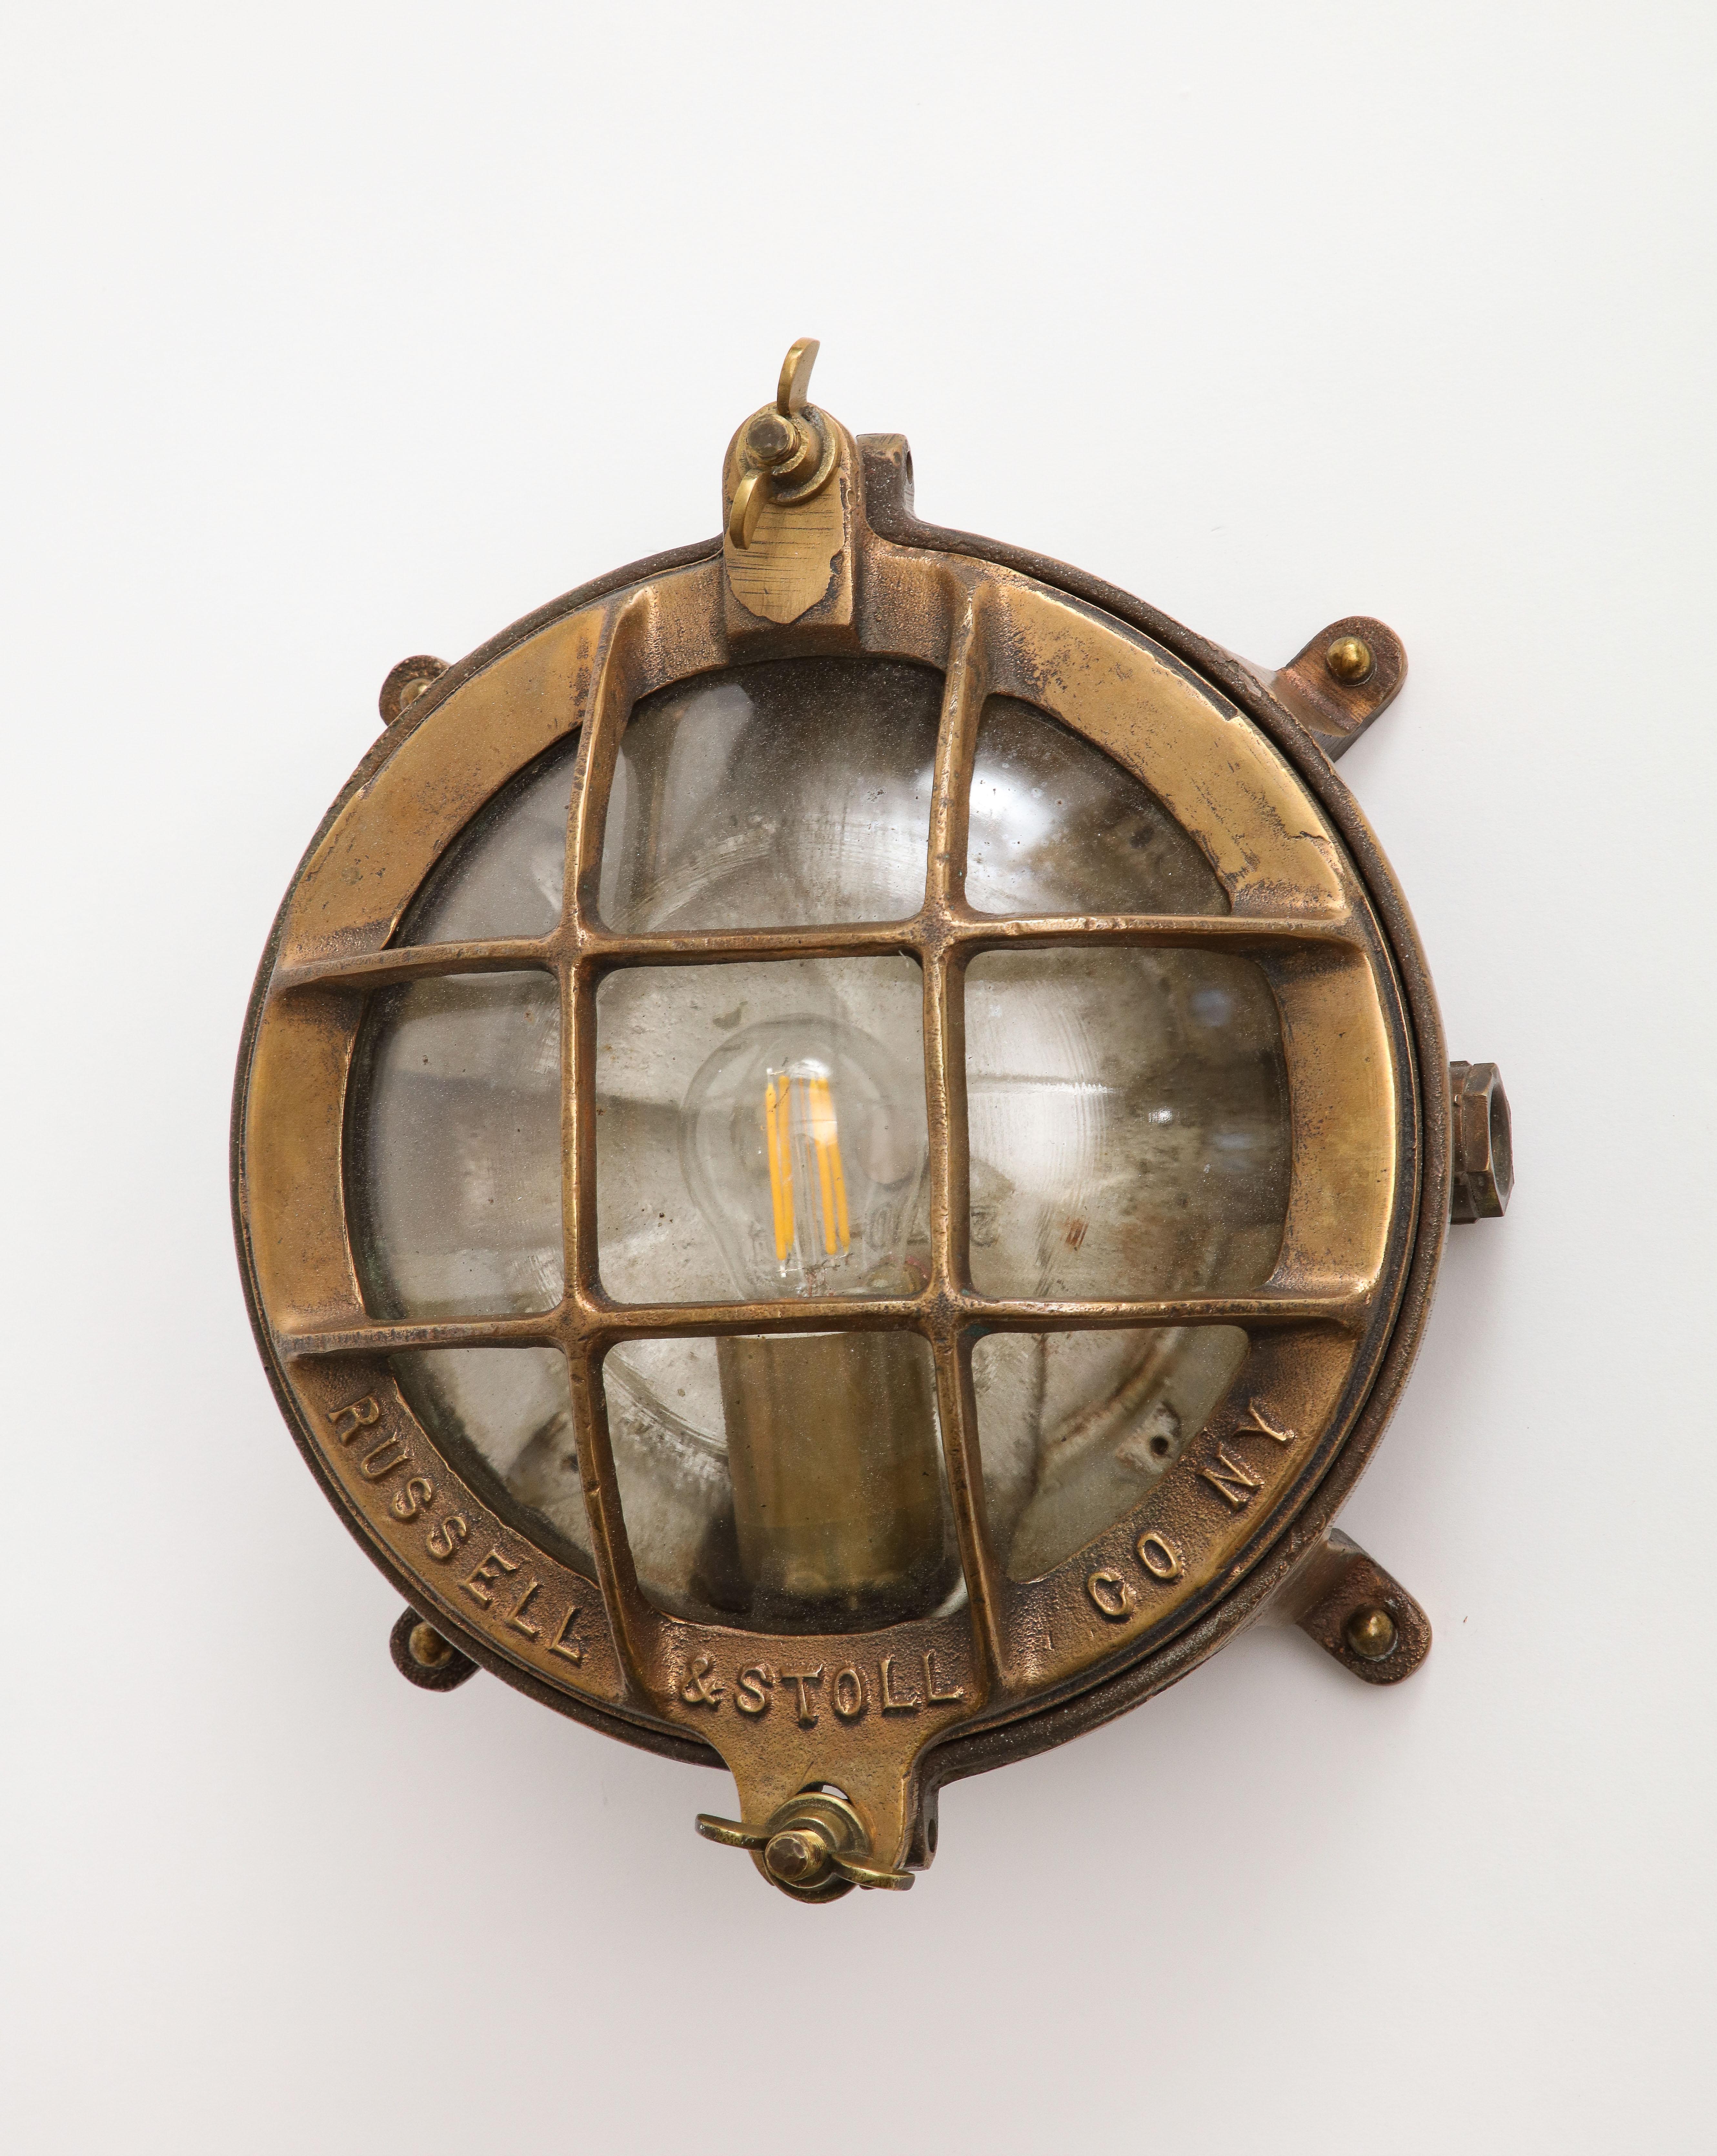 A pair of early 20th century Russell & Stoll Co. cast bronze lamps, can be wall mounted as a sconce or flush mount on the ceiling. The lamps are on a footed base with the glass dome protected by a well designed bronze cage. Industrial period, ship